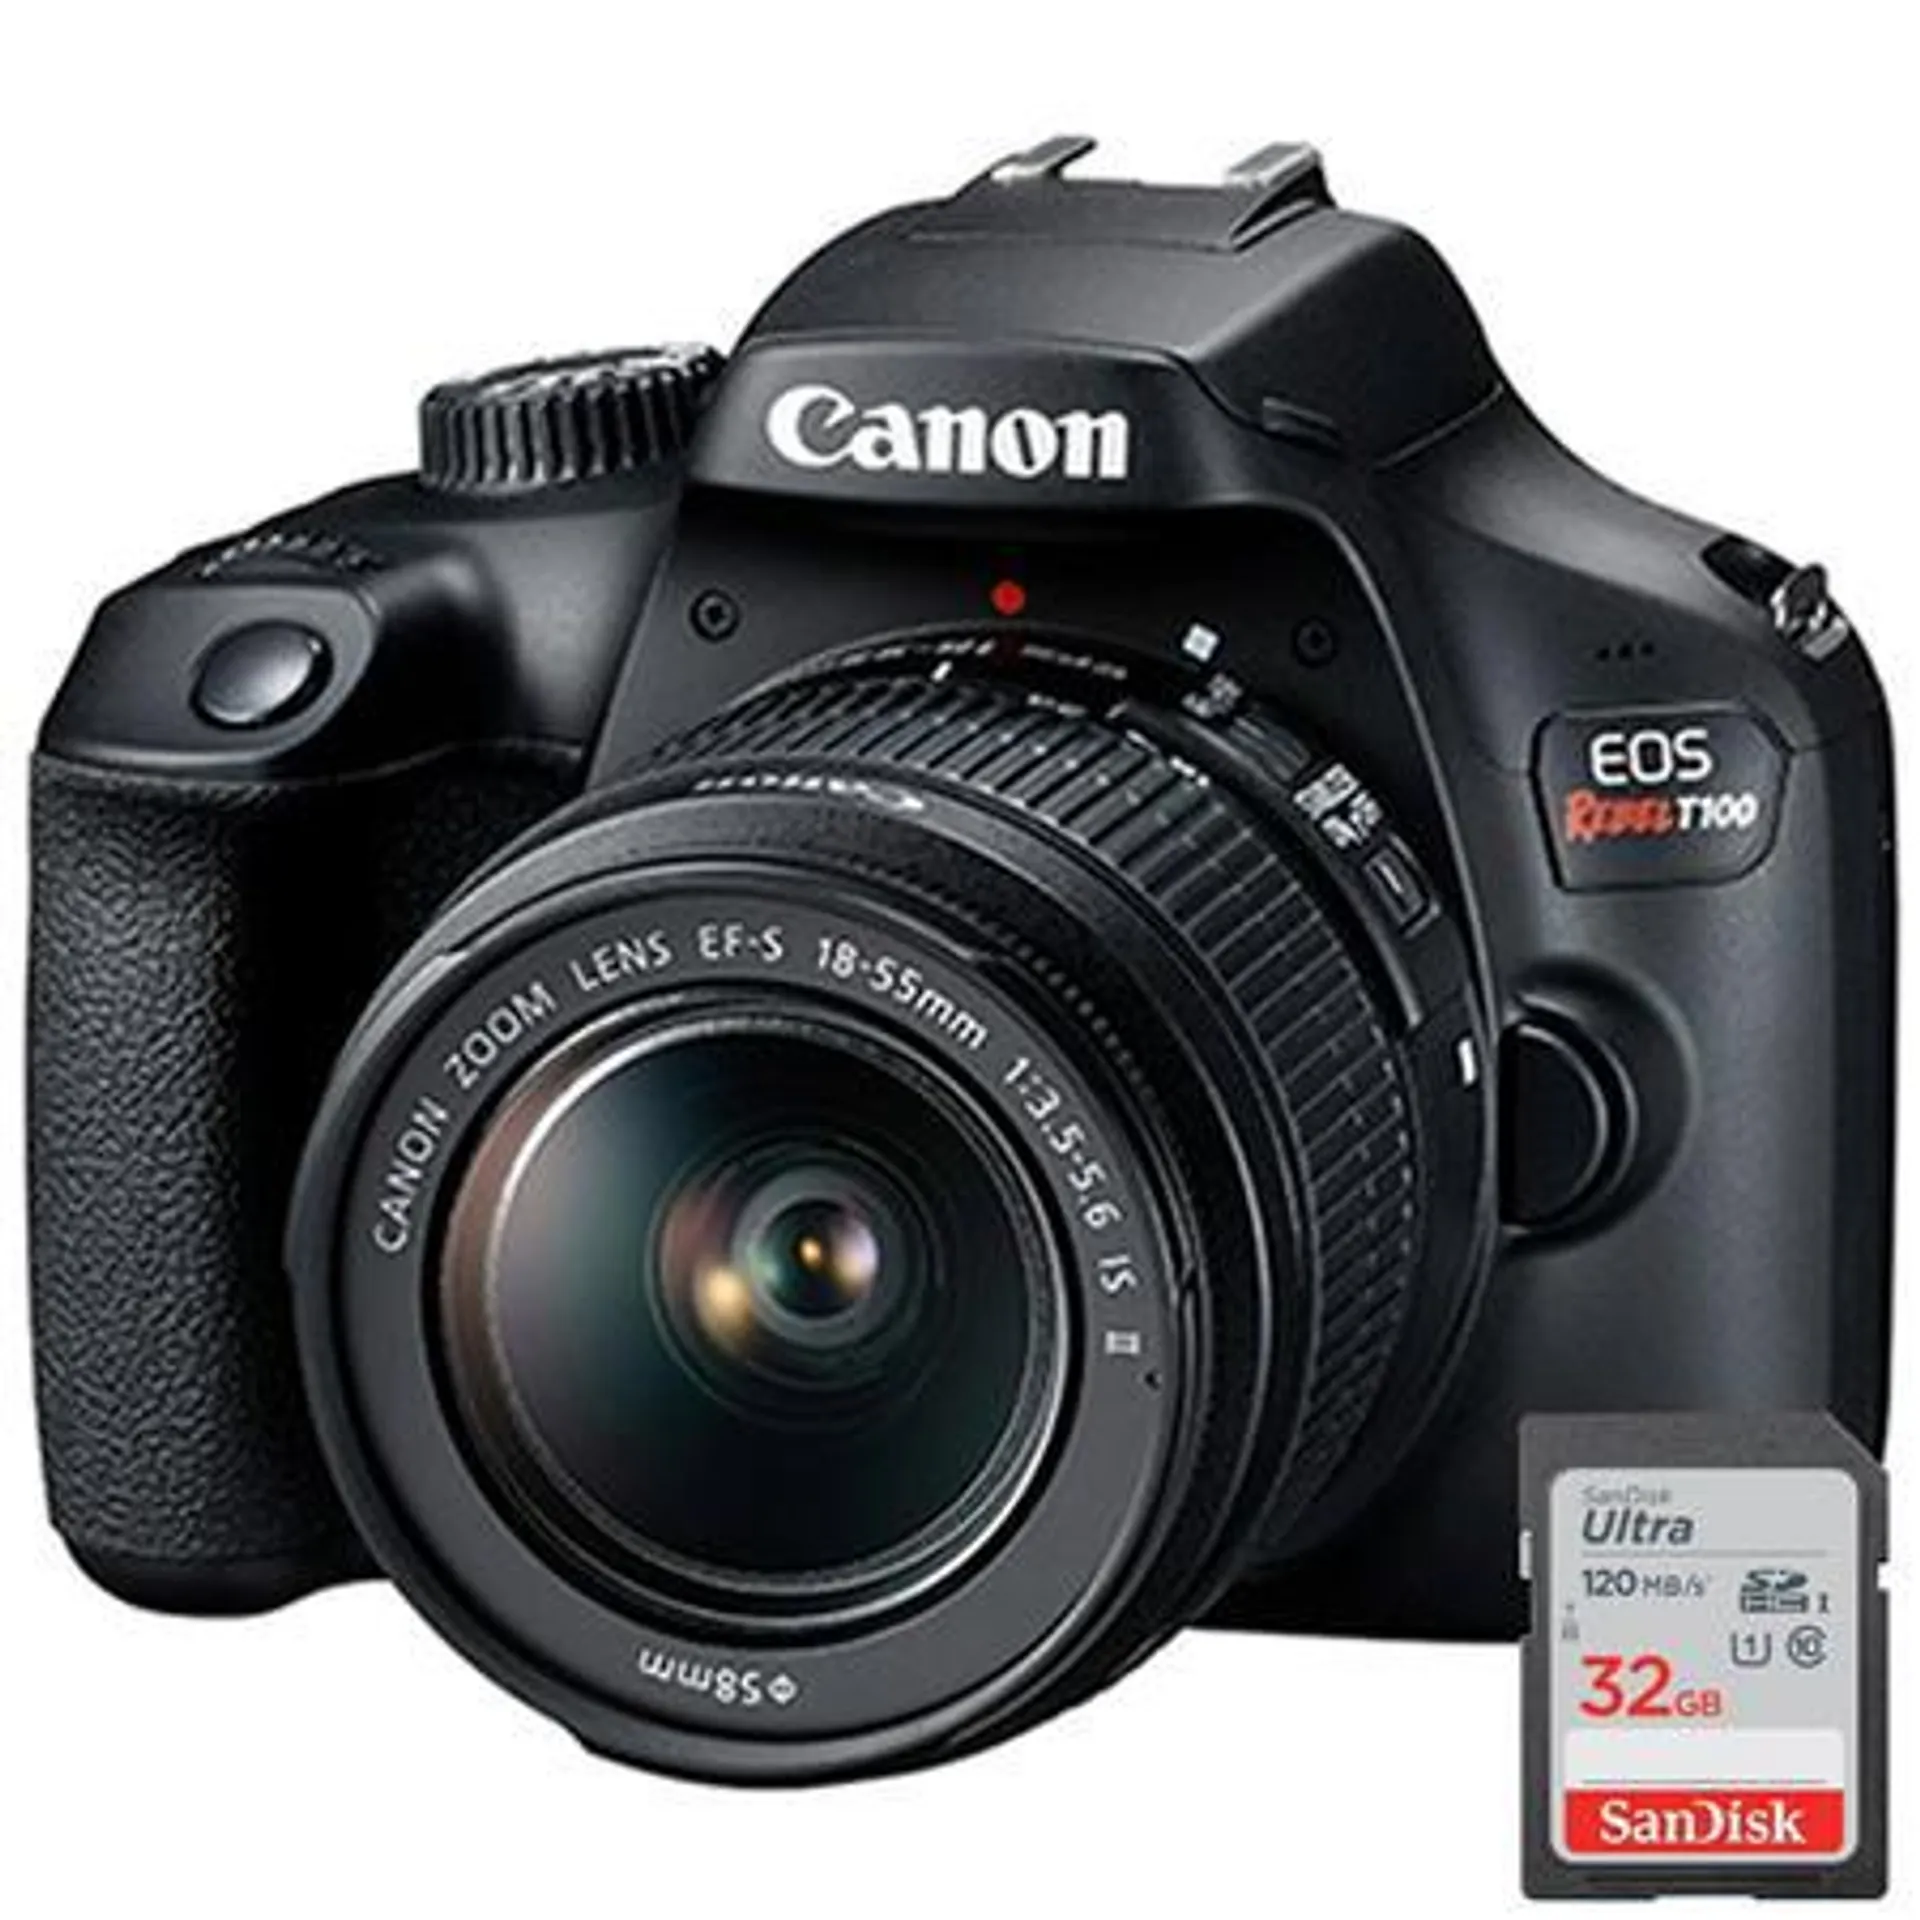 Canon EOS Rebel T100 DSLR Camera with EF-S 18-55mm f/3.5-5.6 IS II Lens